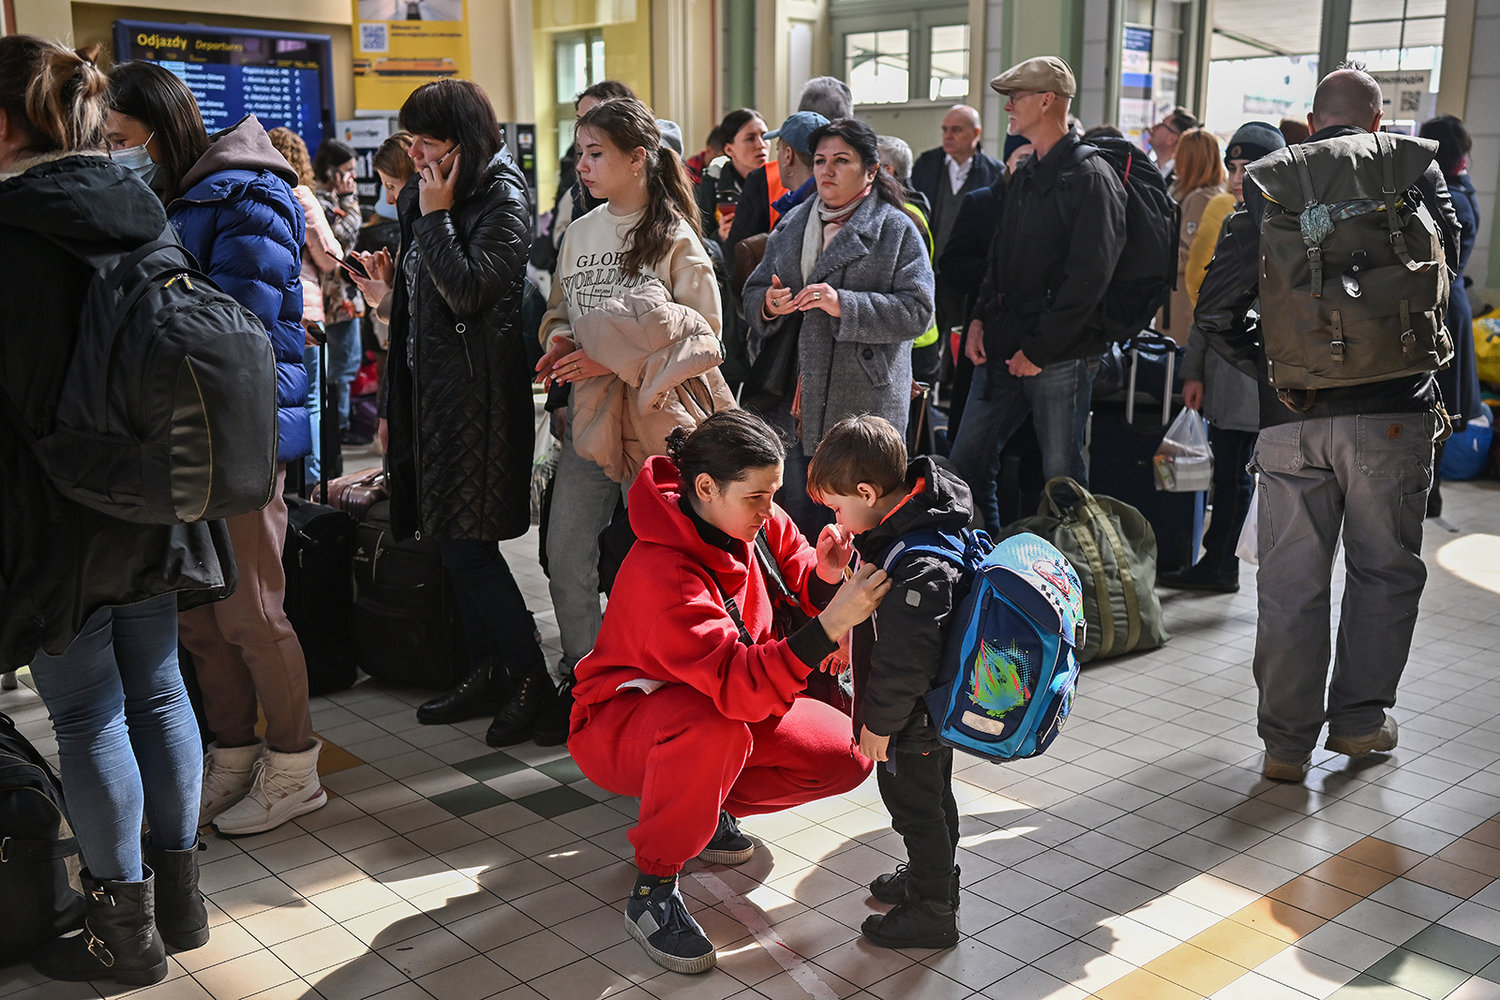 People, mainly women and children, arrive at Przemysl train station after journeying from war-torn Ukraine on March 30, 2022, in Przemysl, Poland. The Polish government has said it may spend €24 billion this year hosting refugees fleeing the war in Ukraine, and is seeking more support from the European Union. With more than 4 million Ukrainian refugees, Poland is now the country with the second-largest foreign refugee population after Turkey. (Jeff J Mitchell/Getty Images/TNS)